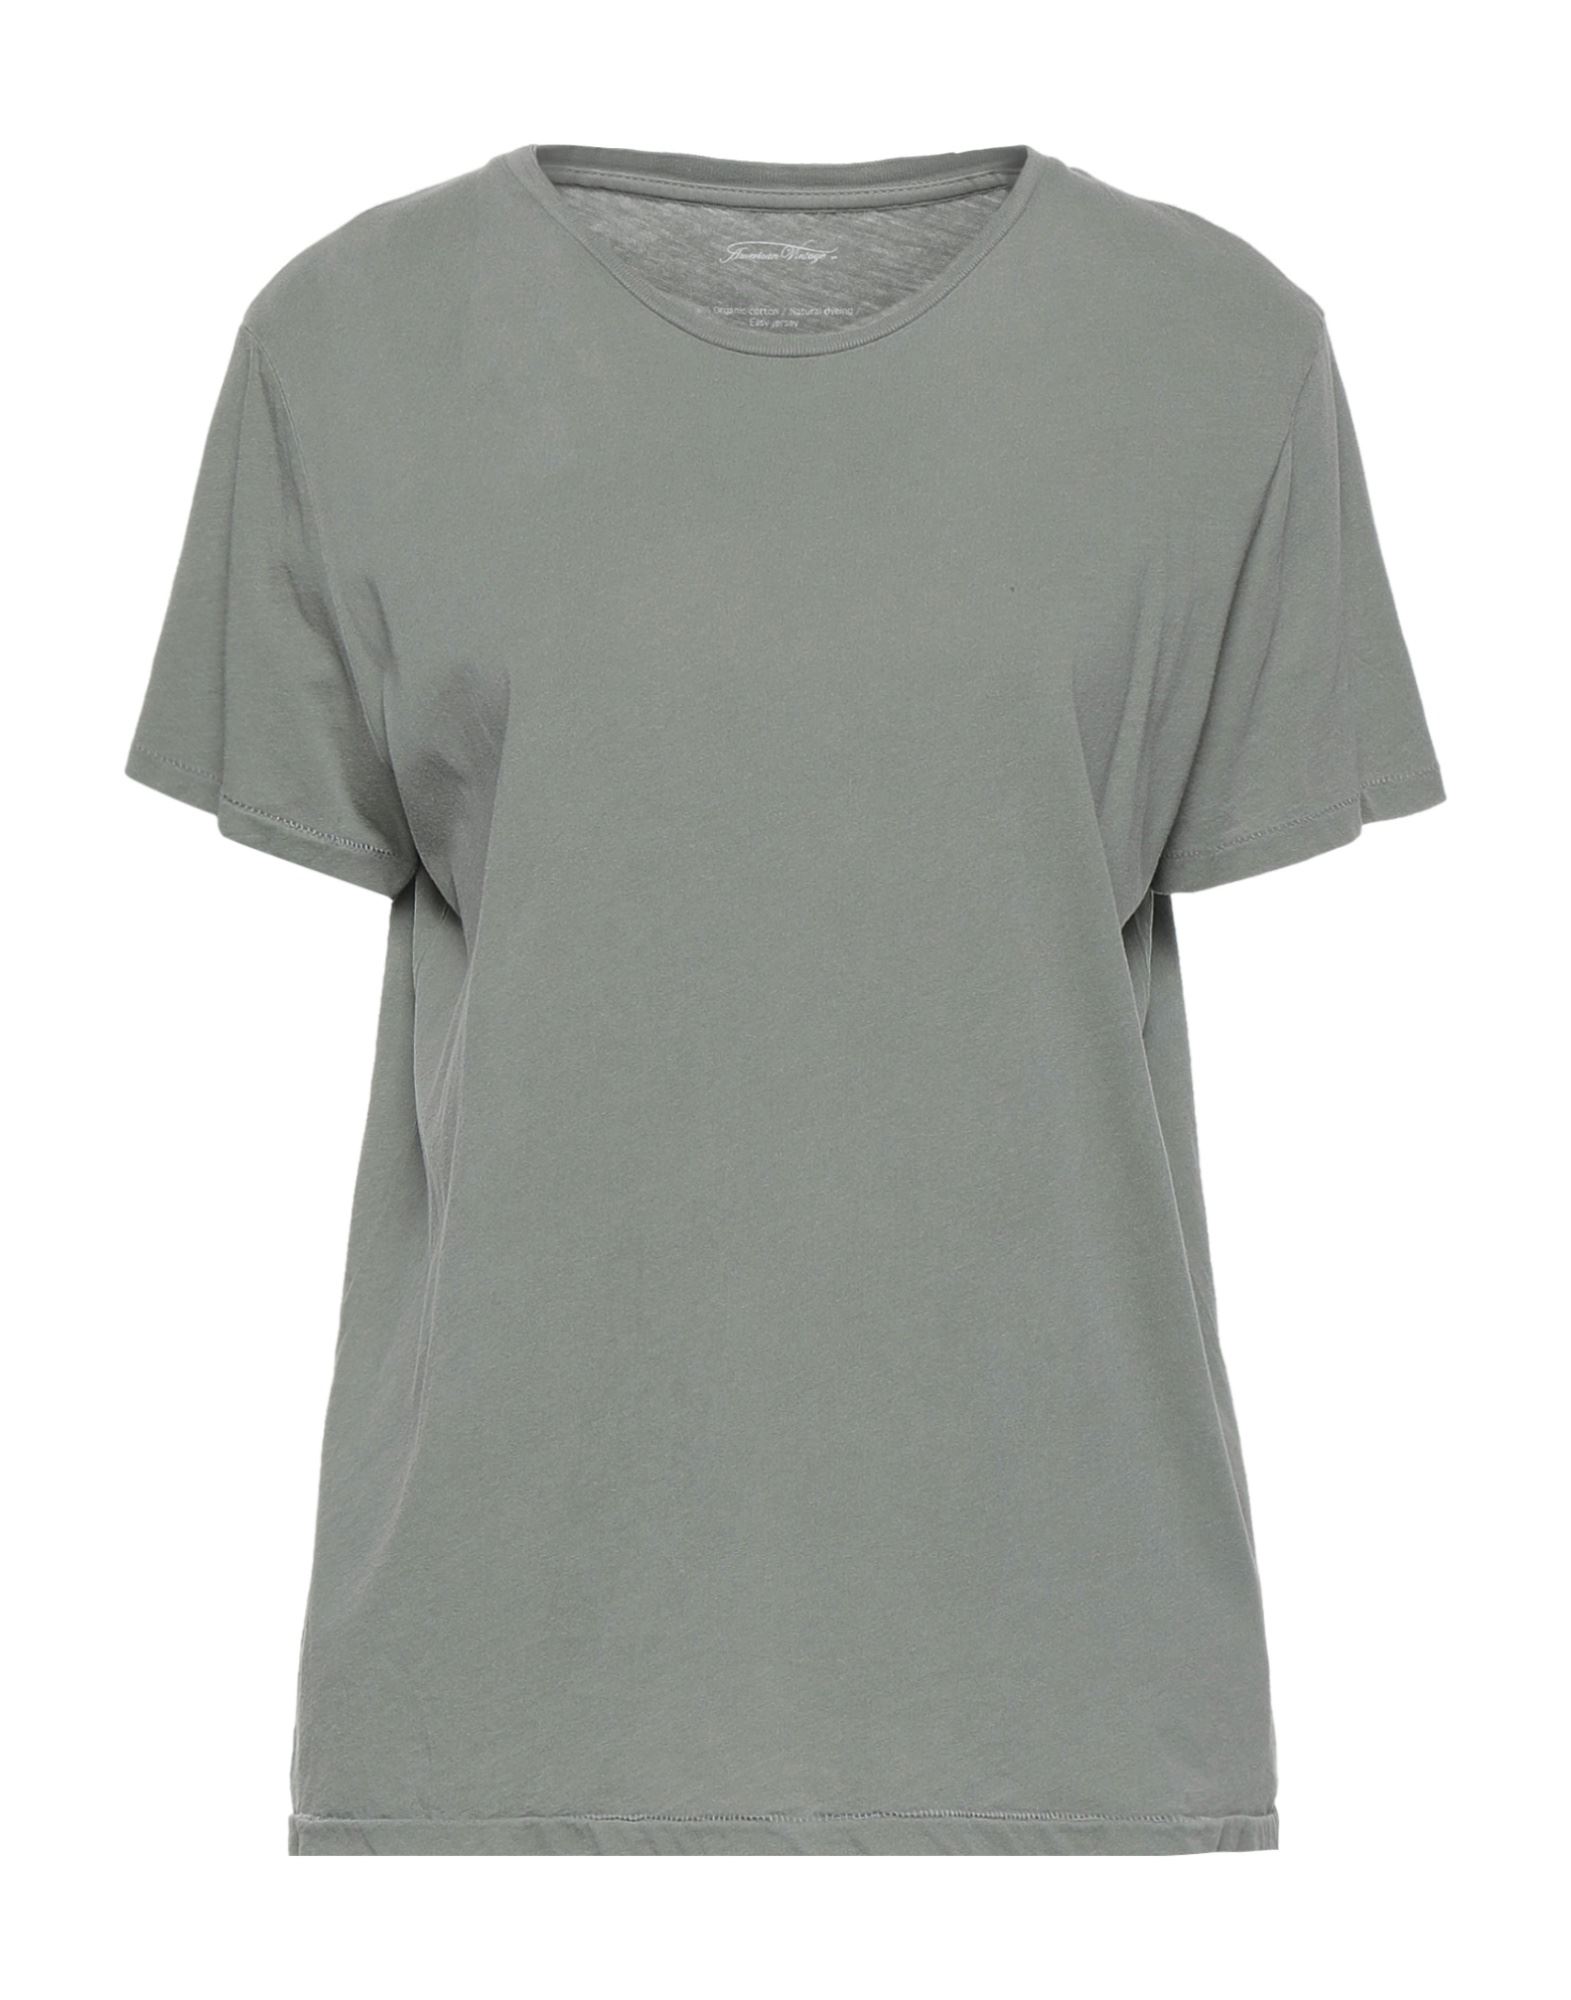 American Vintage T-shirts In Military Green